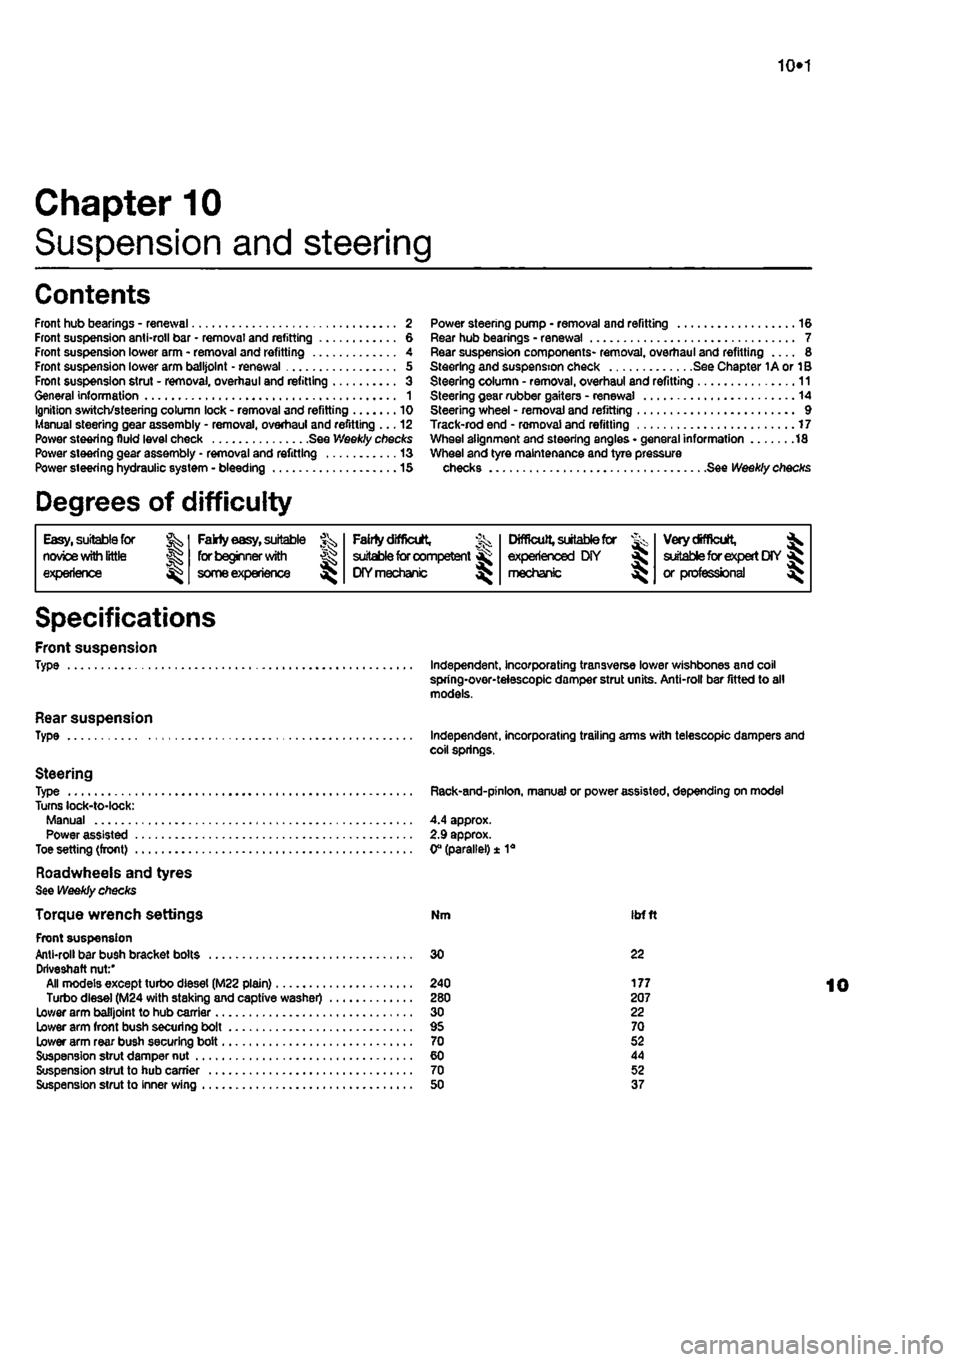 FIAT PUNTO 1999 176 / 1.G Workshop Manual 
10*1 
Chapter 10 
Suspension and steering 
Contents 
Front hub bearings - renewal 2 Front suspension anti-roll bar • removal and refitting 6 Front suspension lower arm - removal and refitting 4 Fro